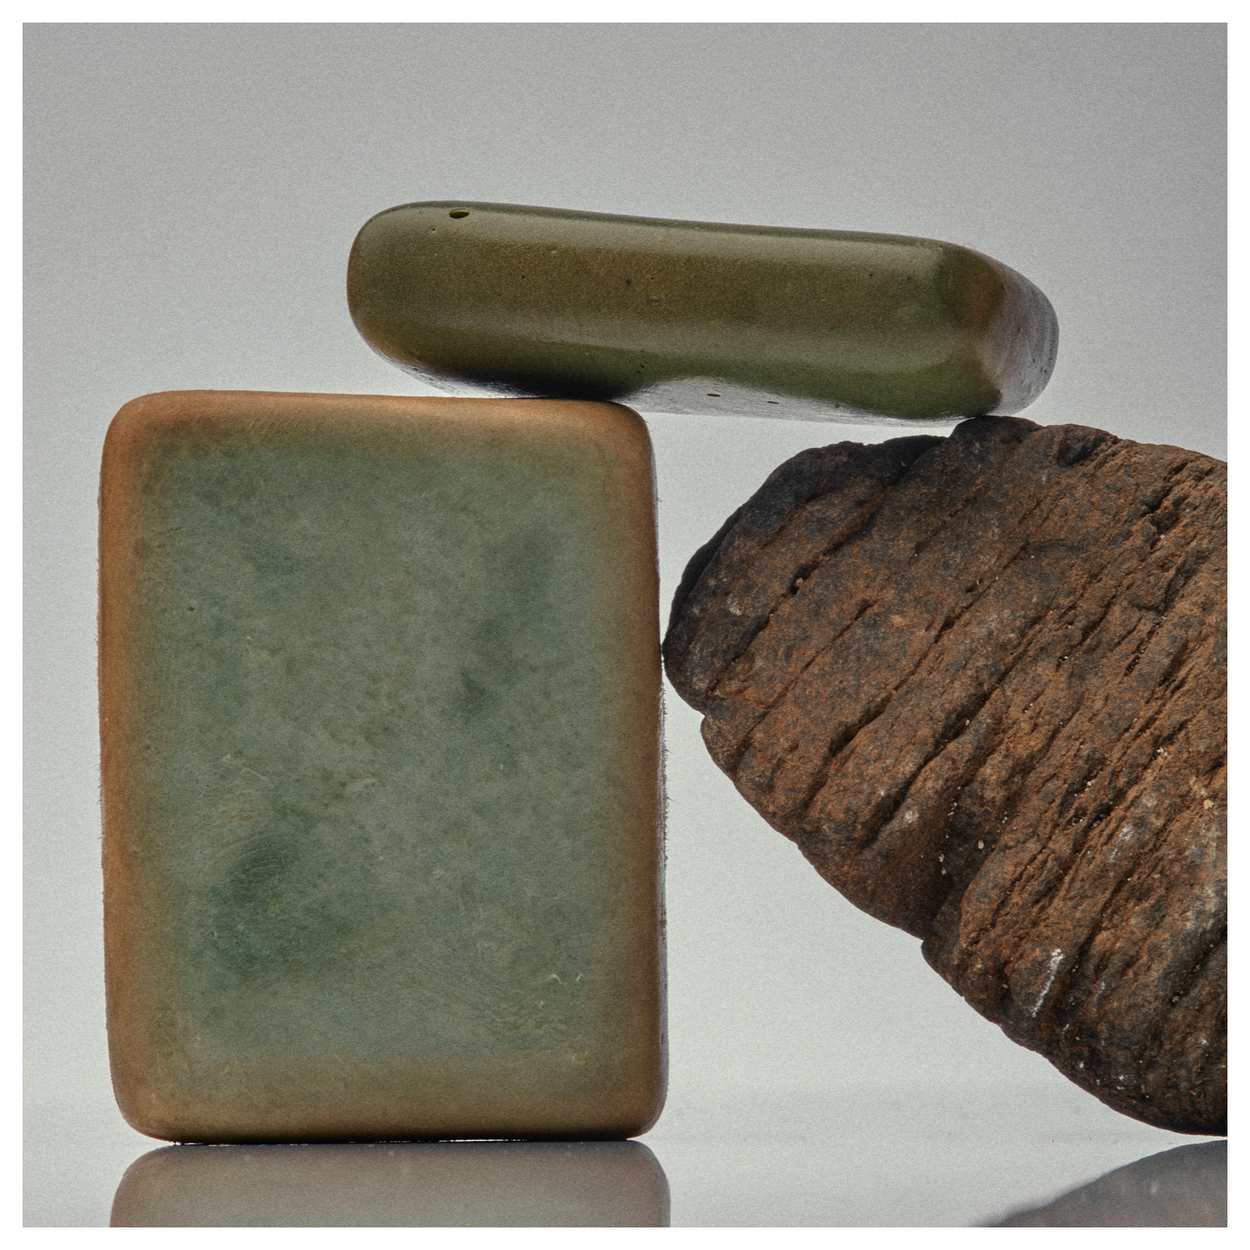 Green interior of Alepp soap bars with rock